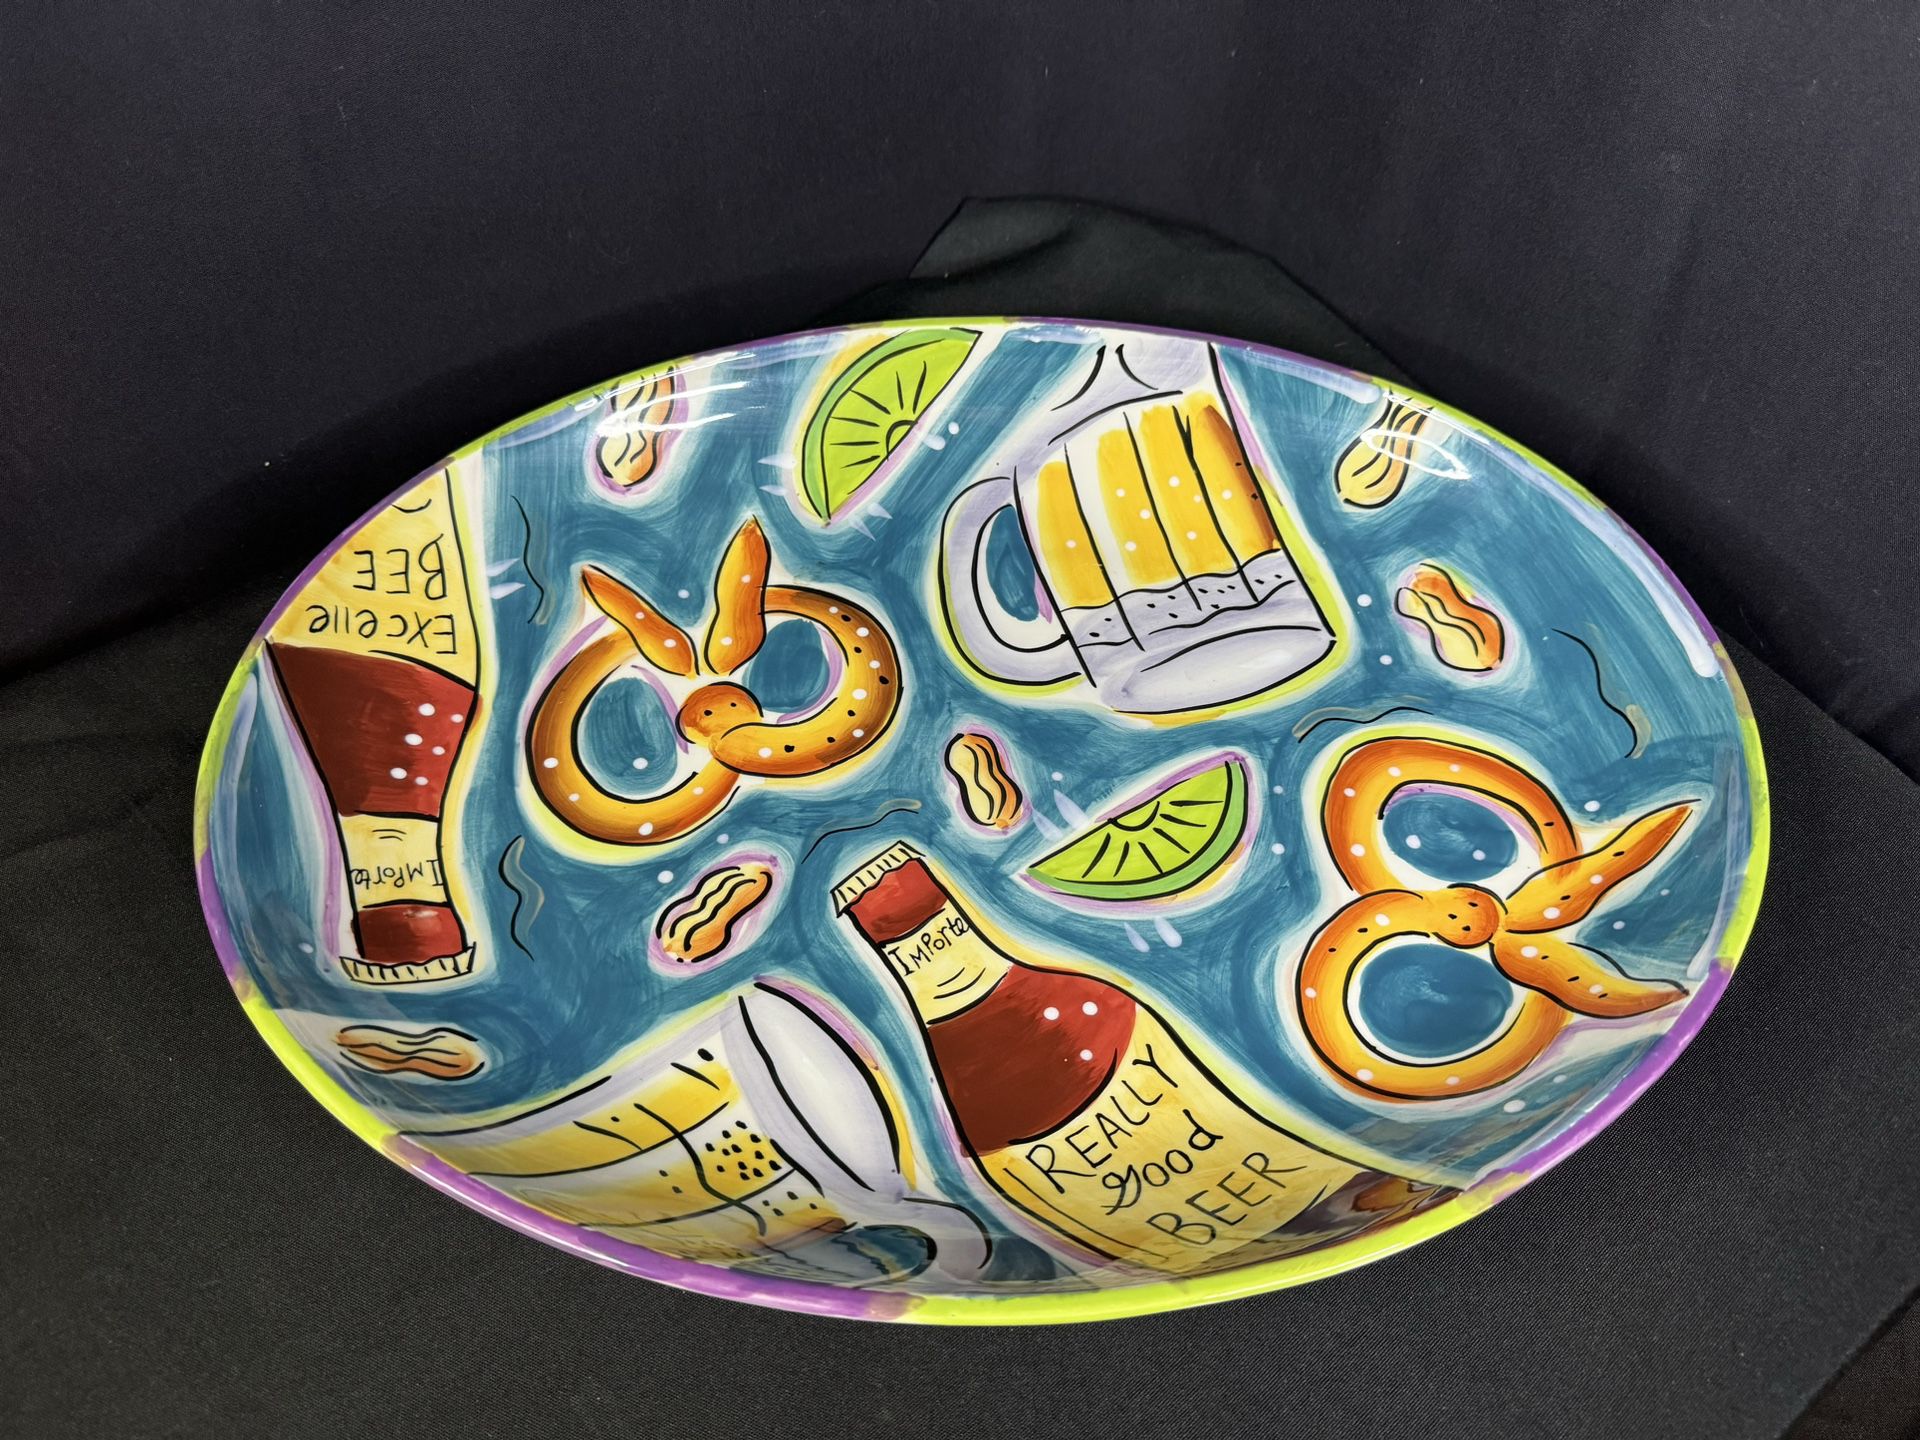 Server~Clay Art Beer Time Hand Painted Stone Lite 2003 Plate Approx.17.5" x 14"